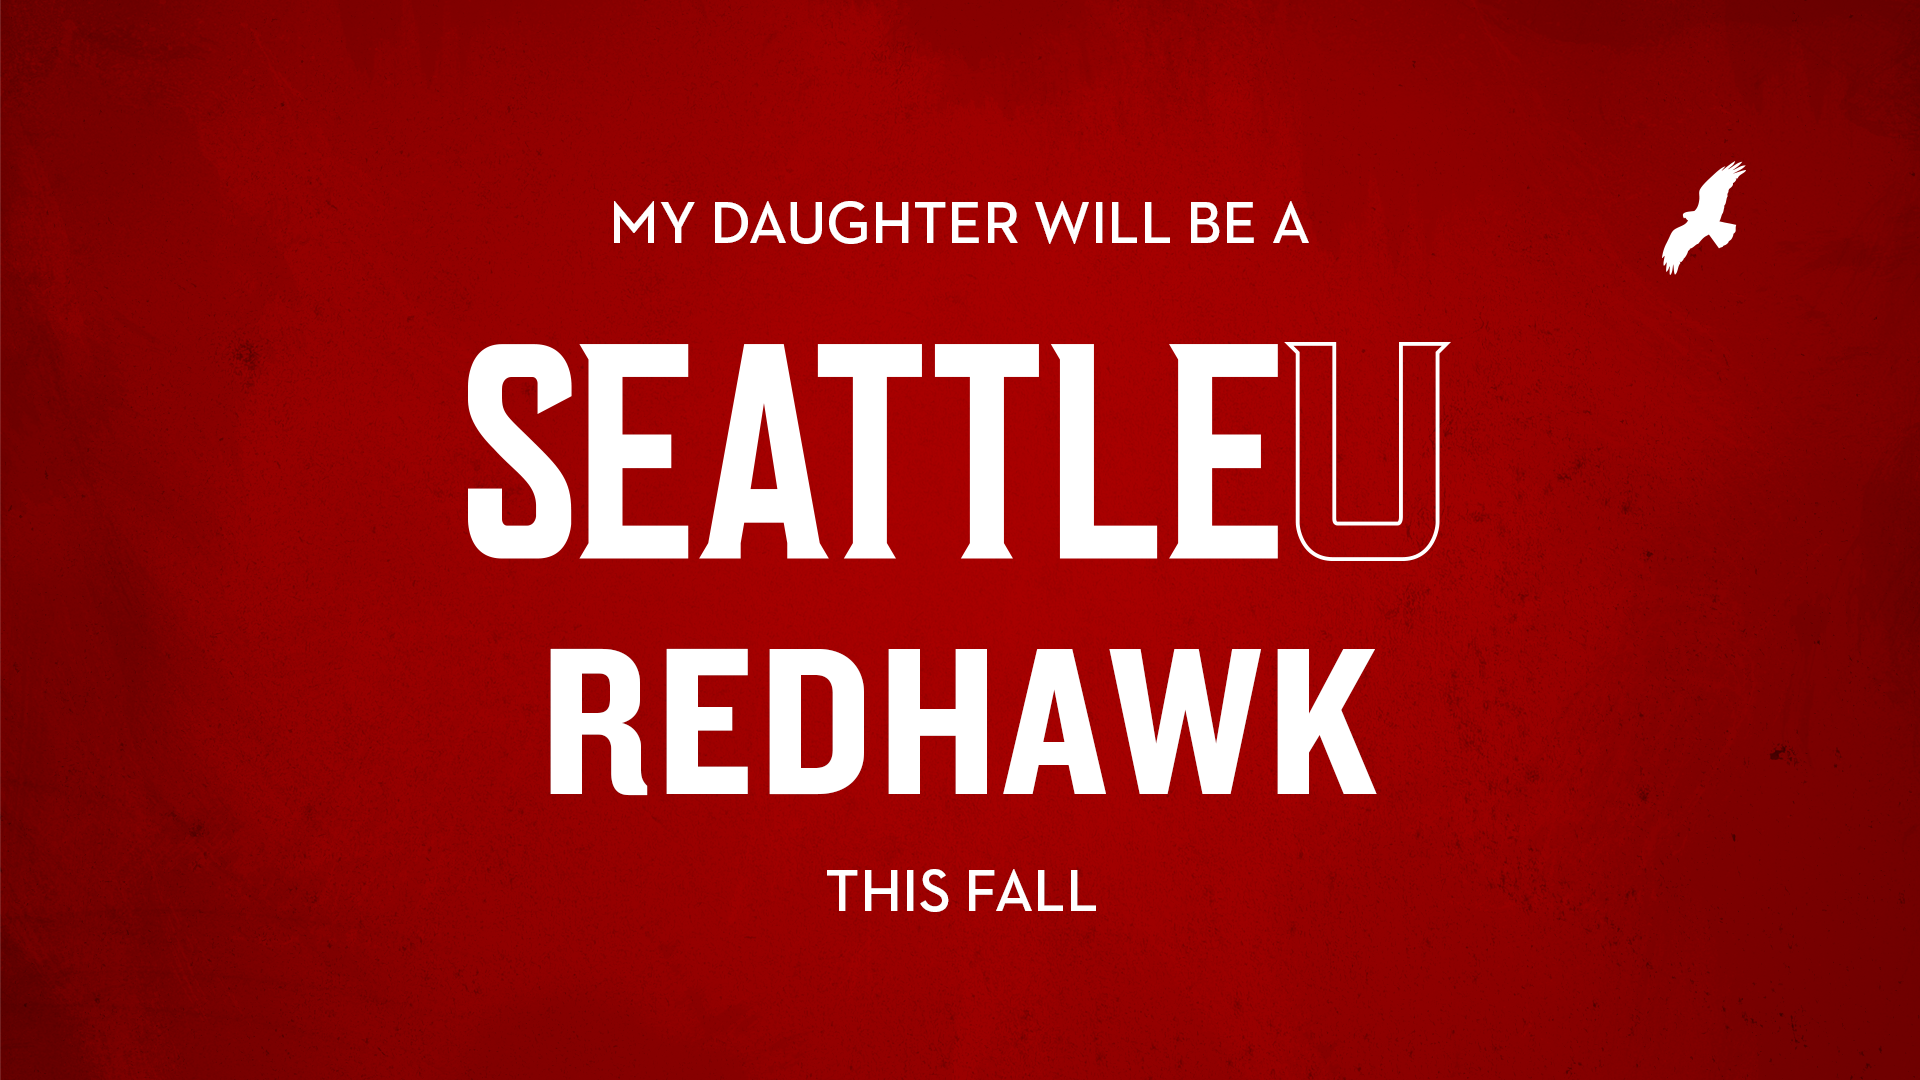 My Daughter will be a Redhawk